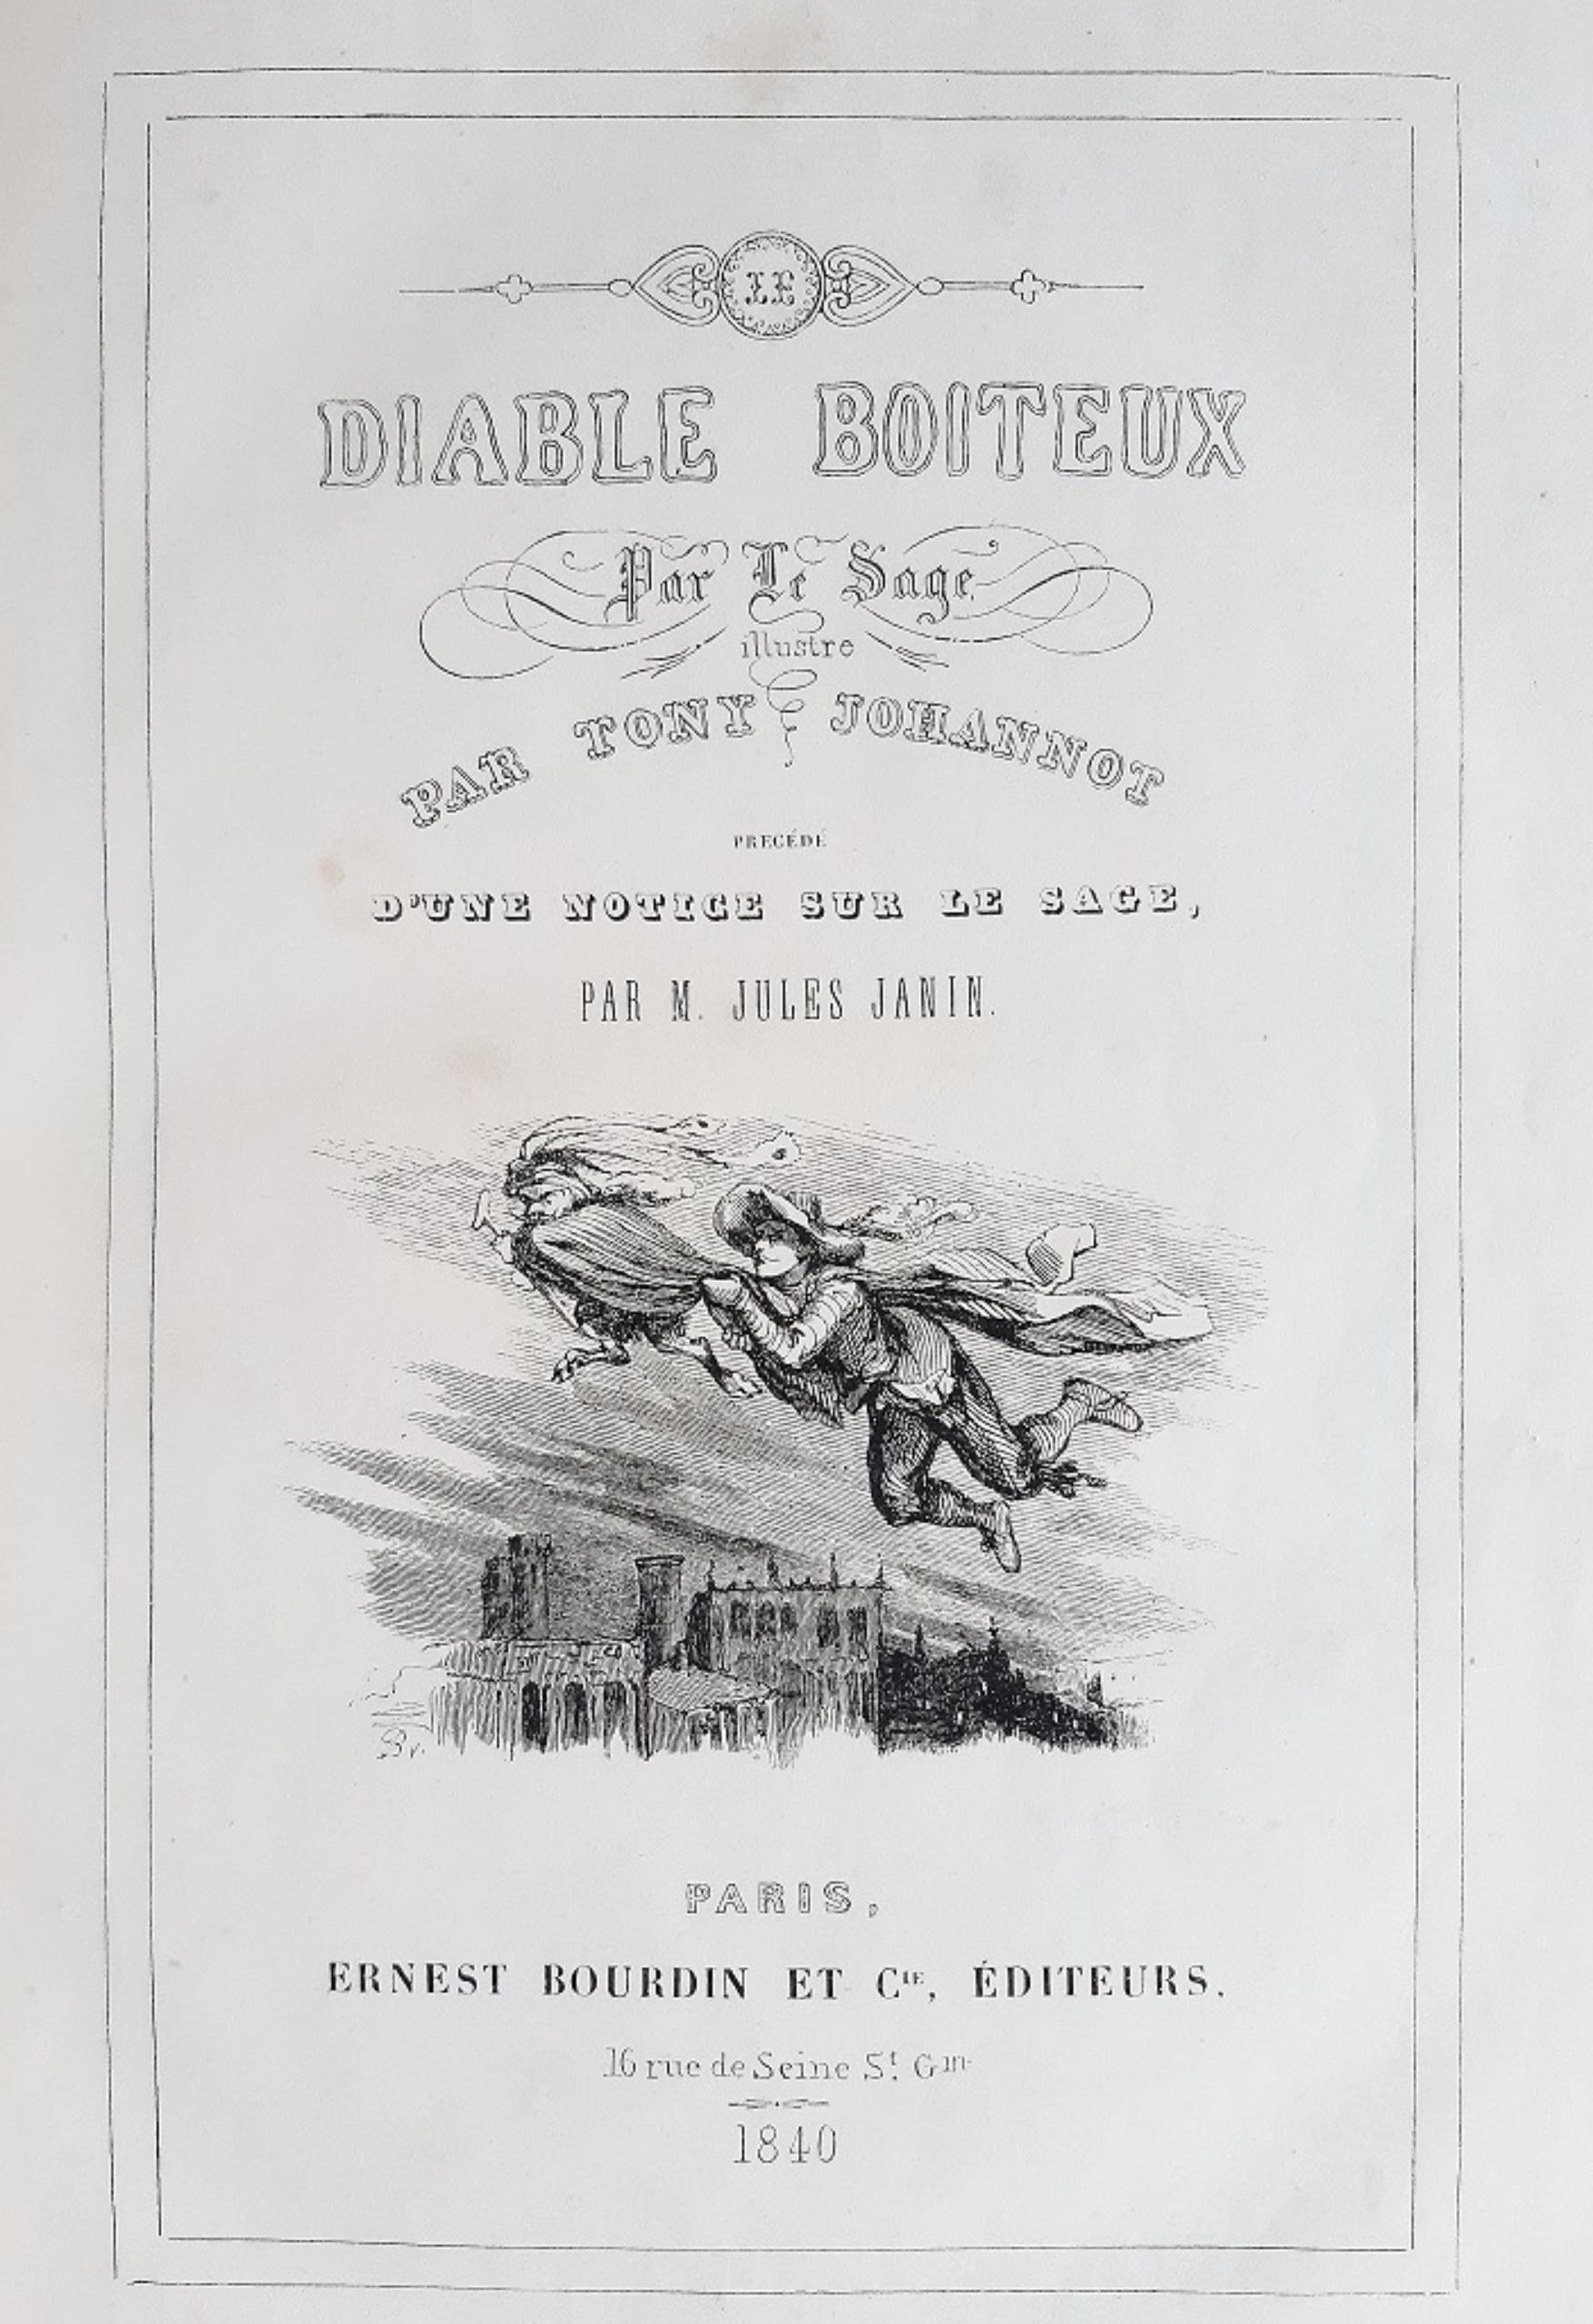 Le Diable Boiteux - Rare Book Illustrated by Tony Johannot - 1840 For Sale 1